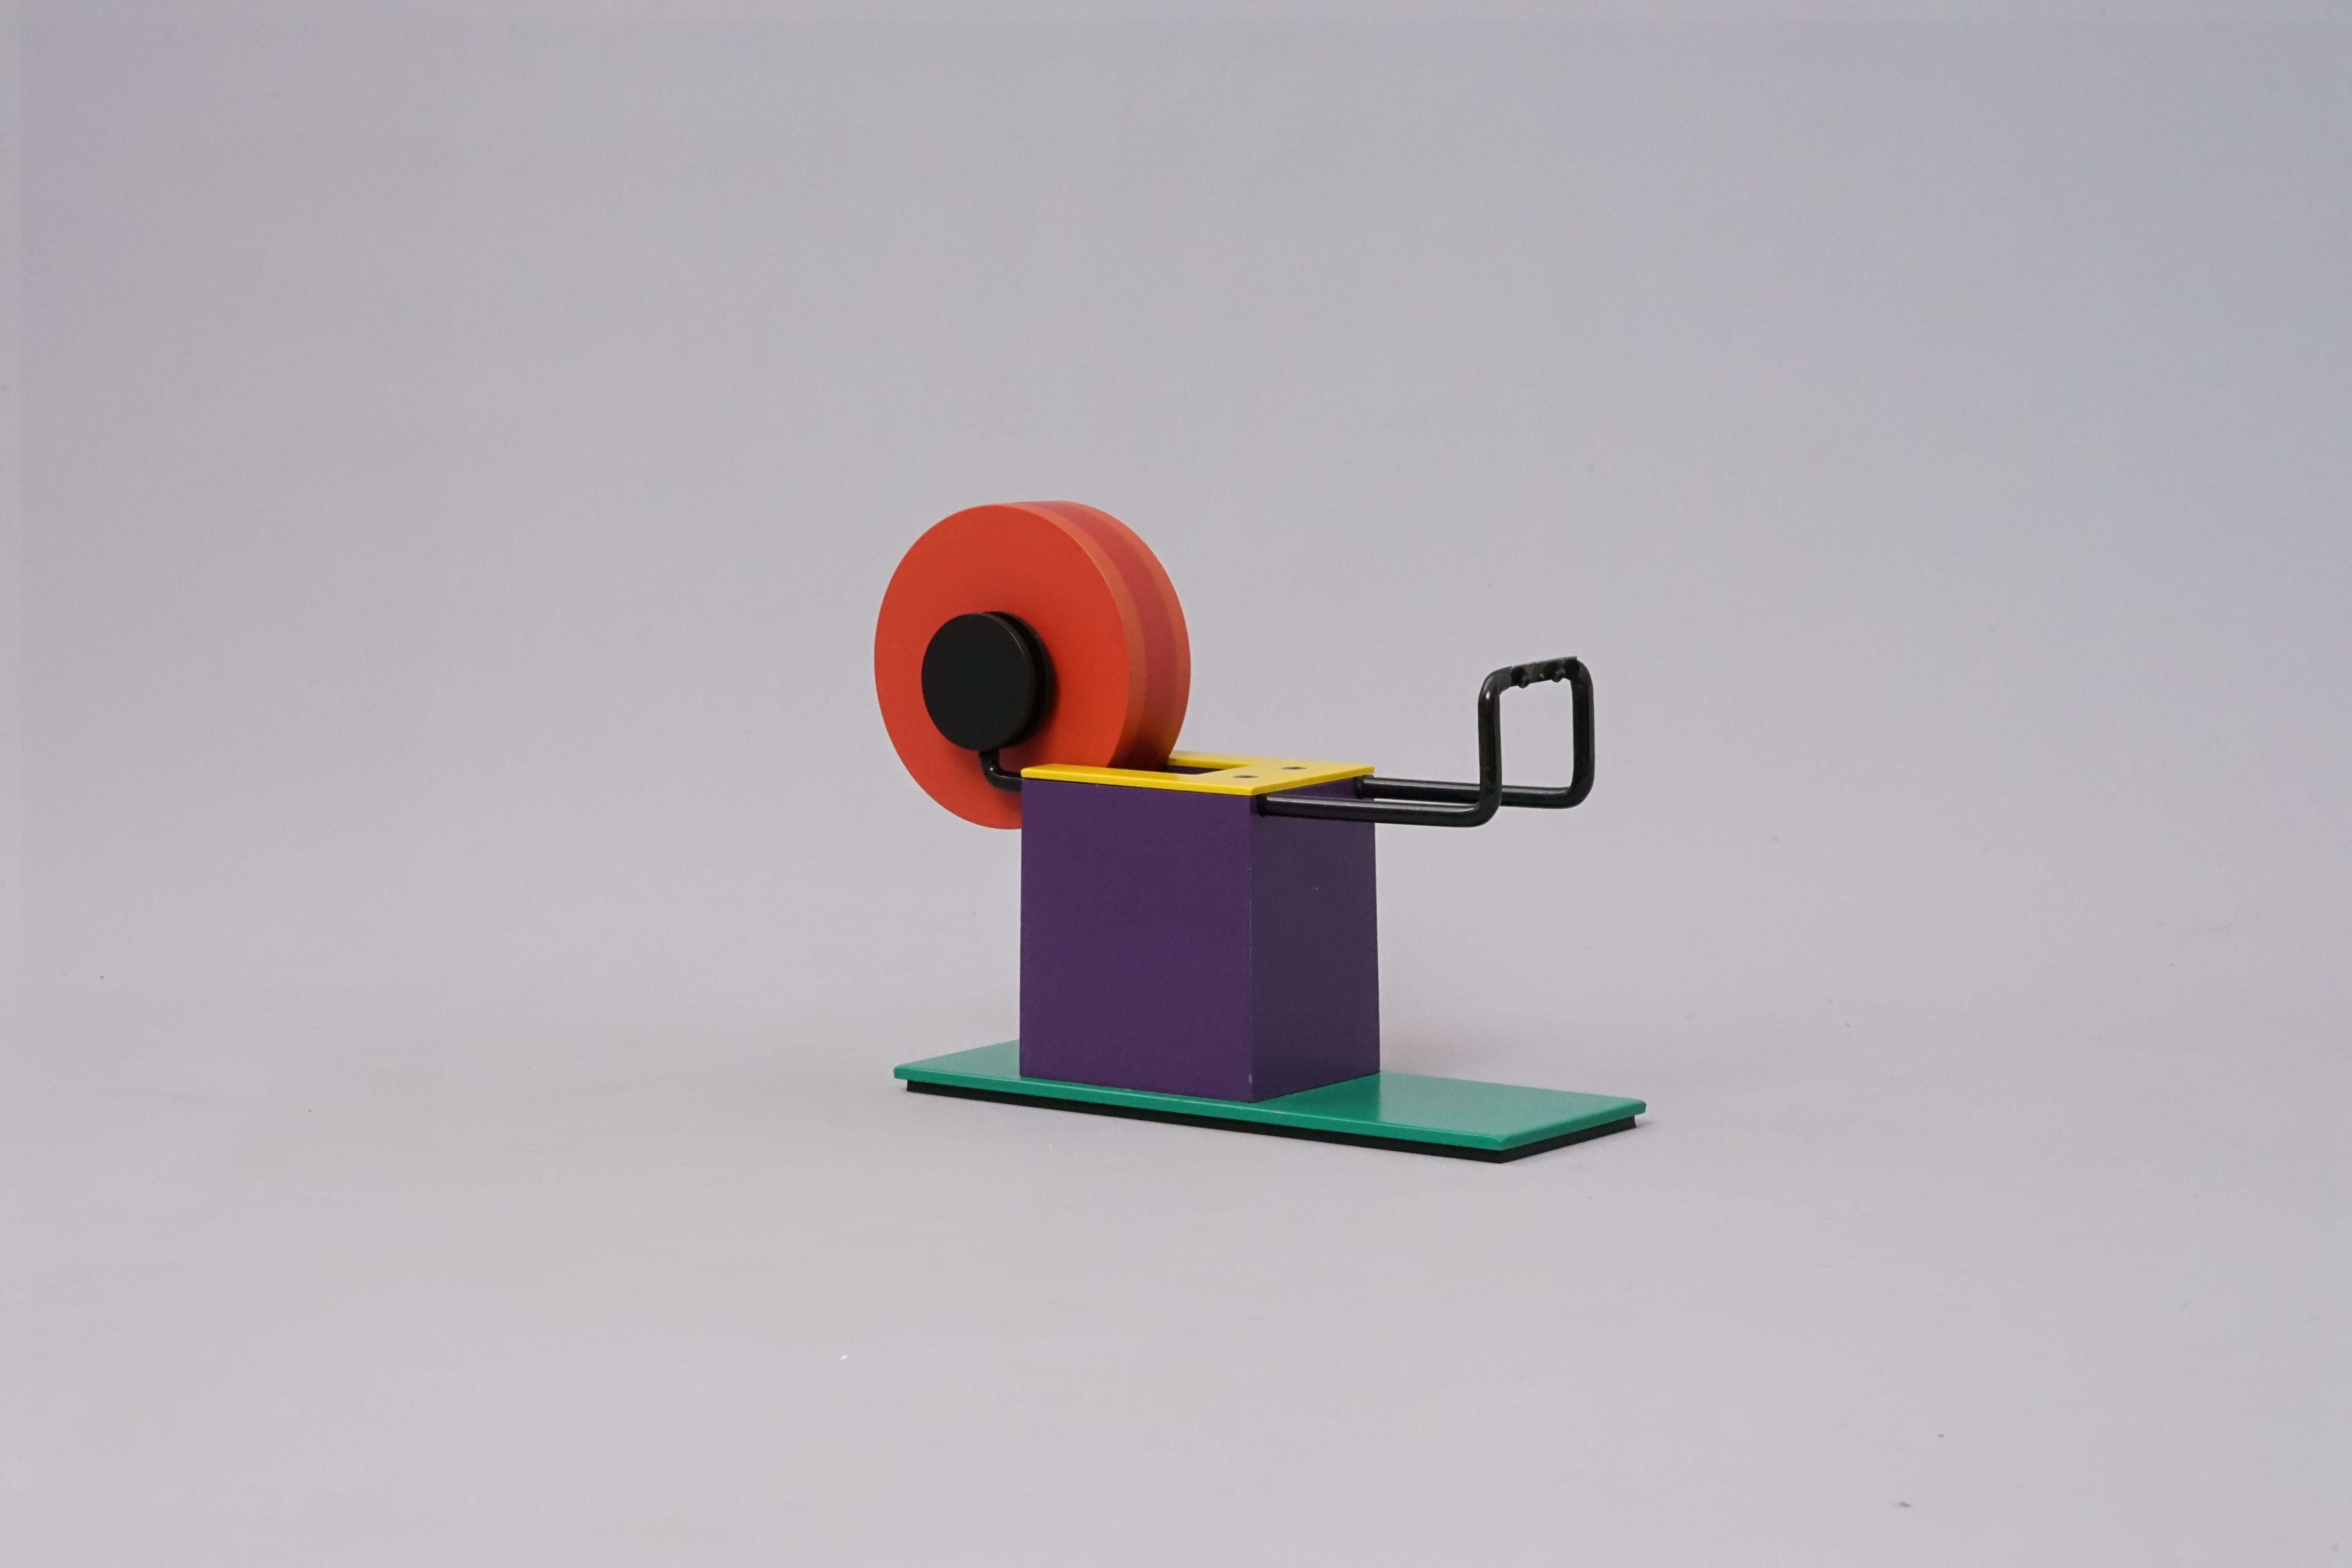 Postmodern desktop Tape Dispenser by Shohei Mihara for Super Present, Japan. 1980s/ 1990s. A special highlight for your desk, whether at home or in the office.